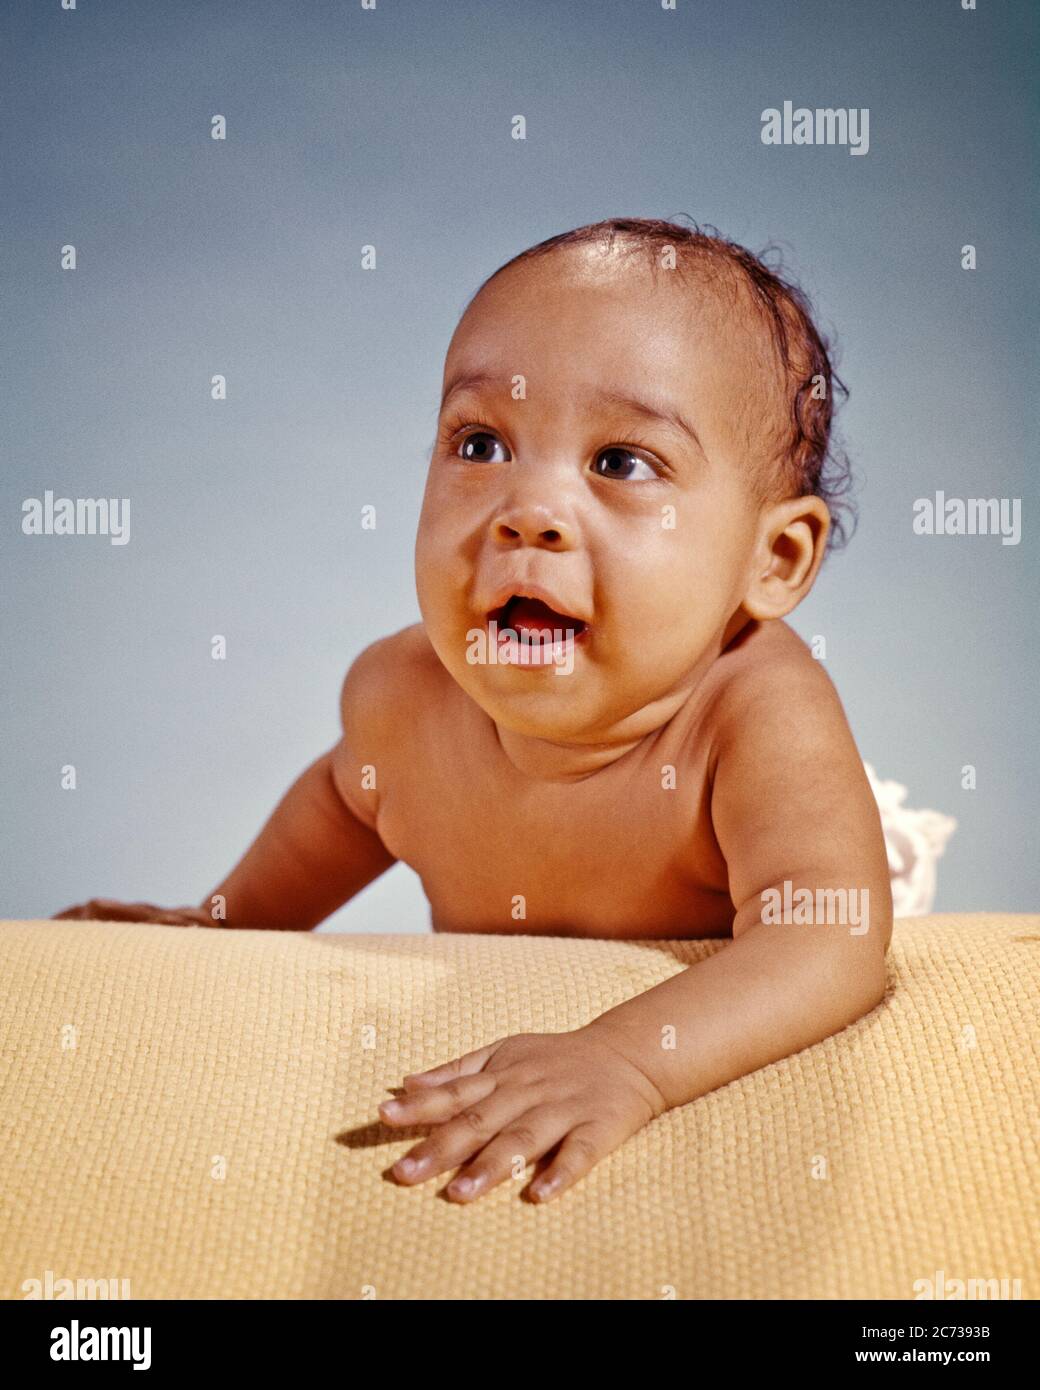 1960s ENERGETIC SMILING AFRICAN-AMERICAN BABY BOY CRAWLING ON COTTON SUMMER BLANKET - kn730 HAR001 HARS HOME LIFE COPY SPACE HALF-LENGTH MALES CRAWLING HEAD AND SHOULDERS CHEERFUL DISCOVERY AFRICAN-AMERICANS AFRICAN-AMERICAN EXCITEMENT LOW ANGLE PROGRESS BLACK ETHNICITY PRIDE ON SMILES CONCEPTUAL CURIOUS JOYFUL STYLISH BABY BOY CHARMING ENERGETIC GROWTH JUVENILES EXPLORING HAR001 INQUISITIVE OLD FASHIONED AFRICAN AMERICANS Stock Photo